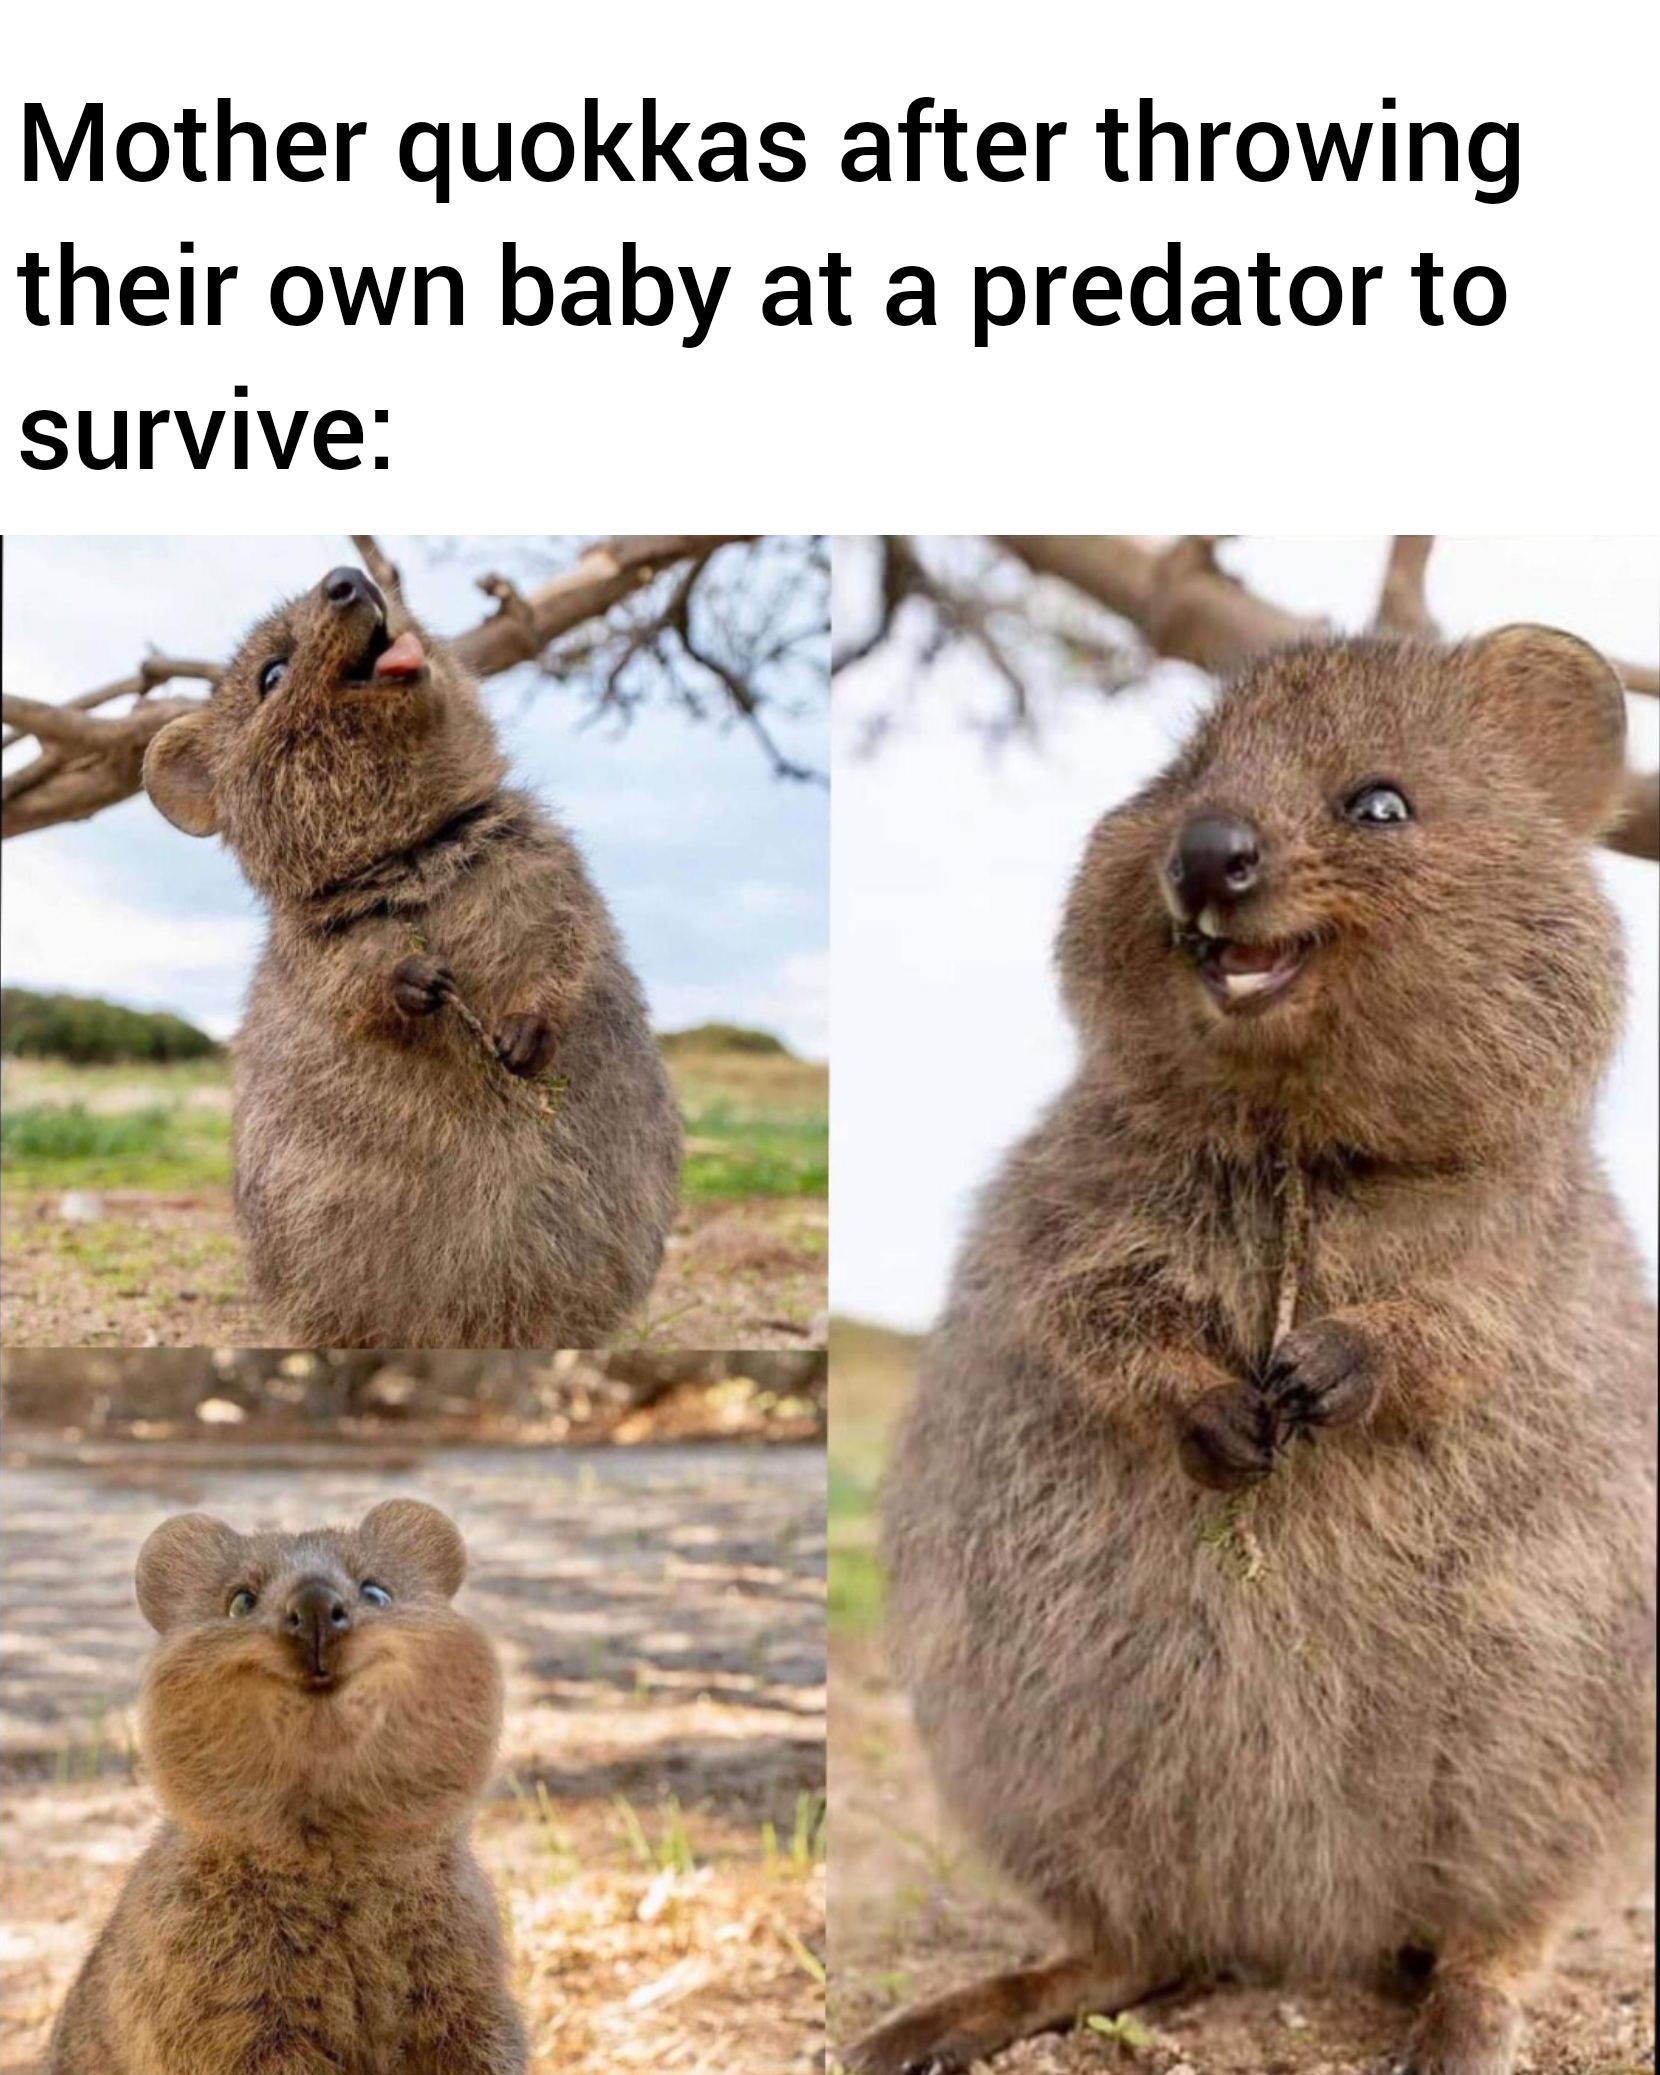 funny memes and random pics - hilarious memes - Mother quokkas after throwing their own baby at a predator to survive